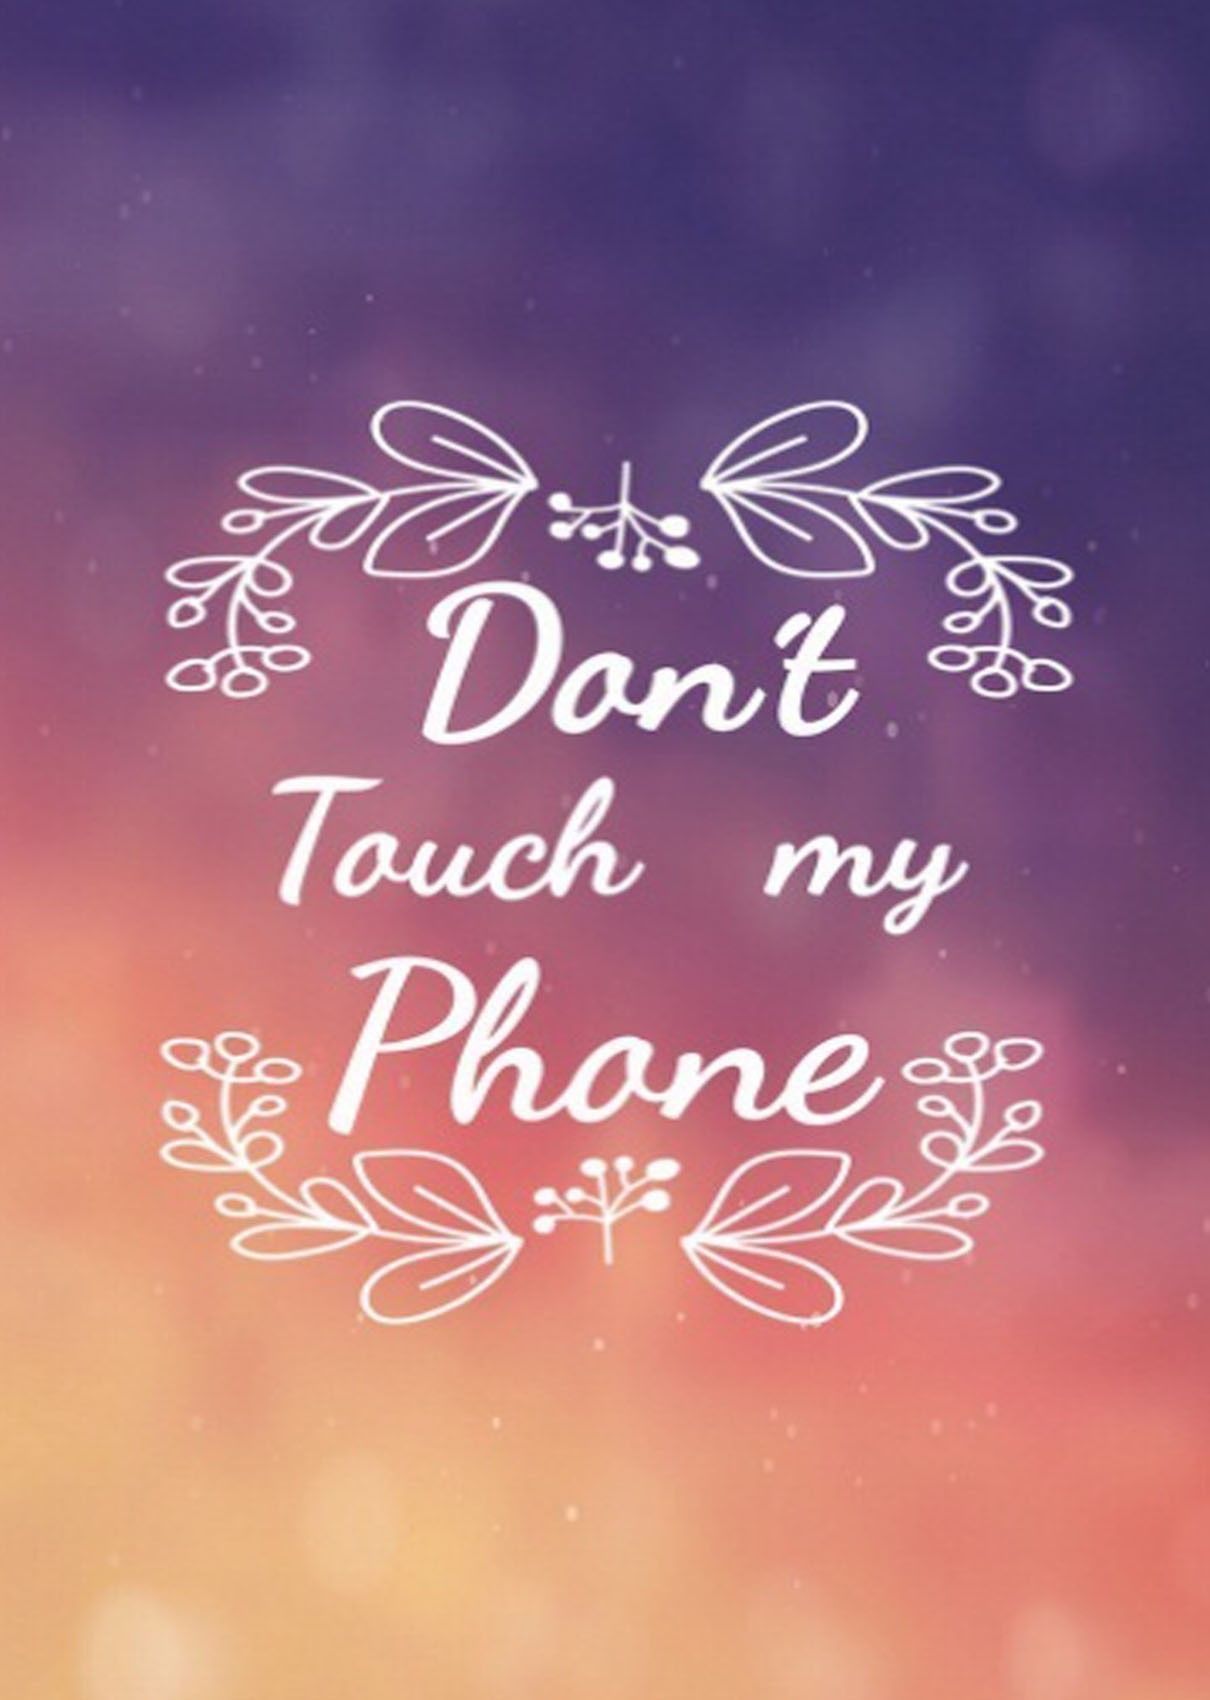 Wallpaper dont touch my phone - Don't touch my phone